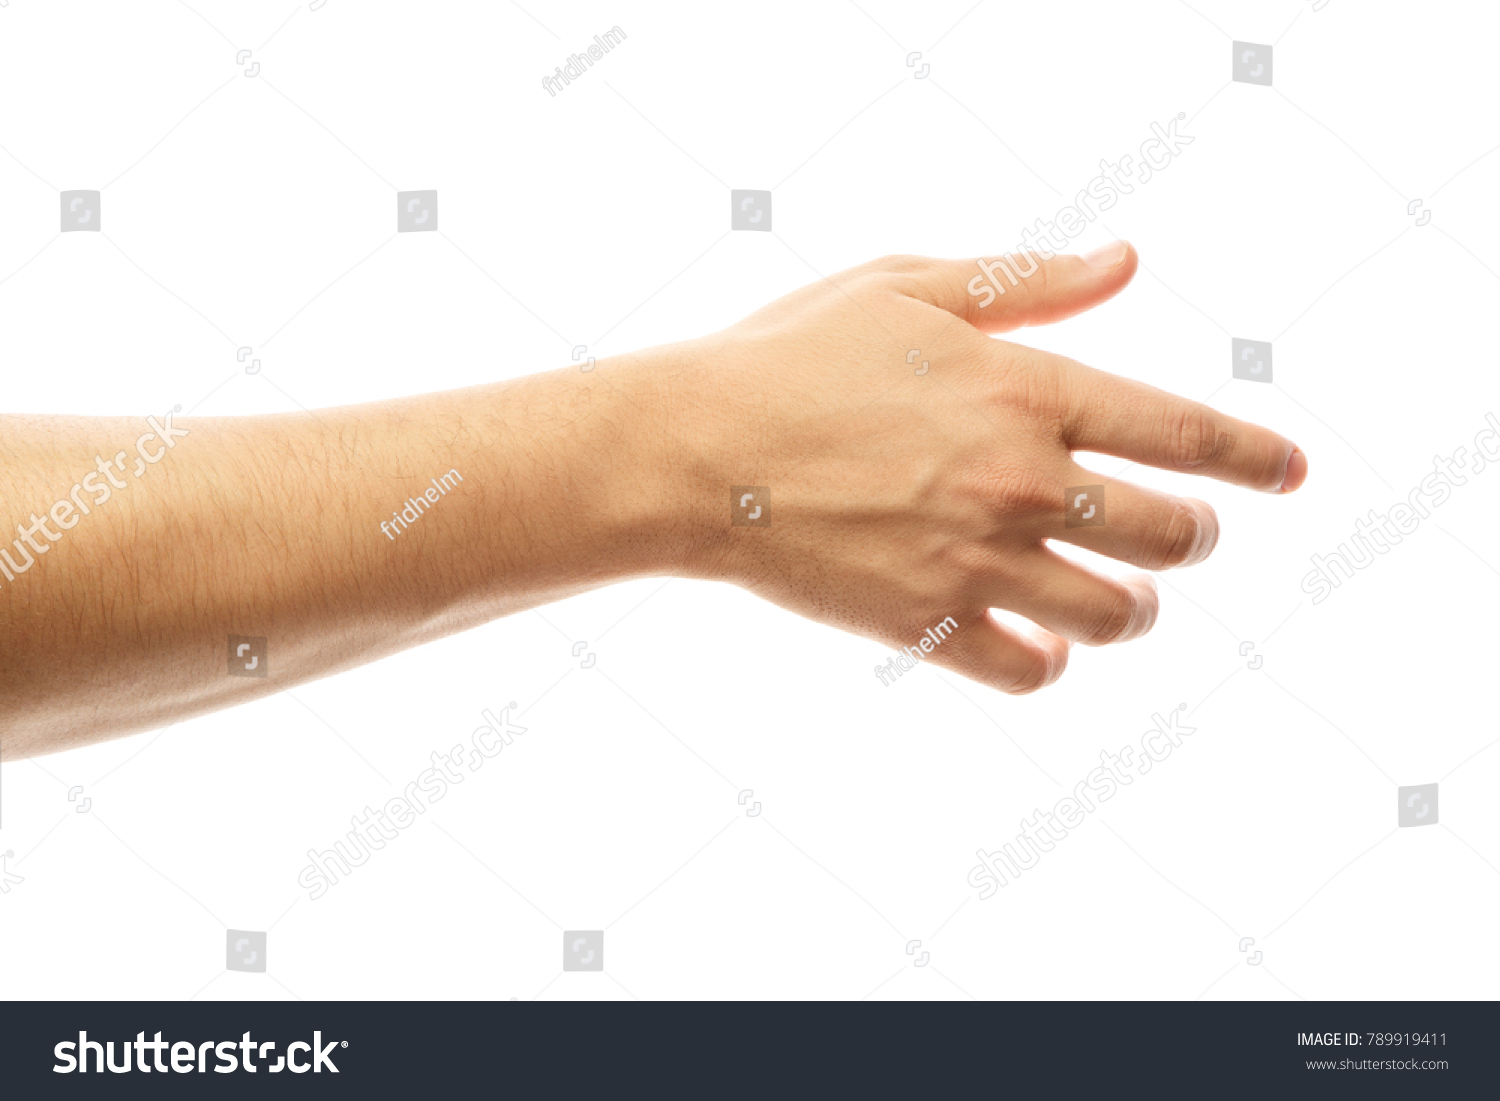 Man stretching hand to handshake isolated on a white background. Man hand ready for handshaking. Alpha #789919411